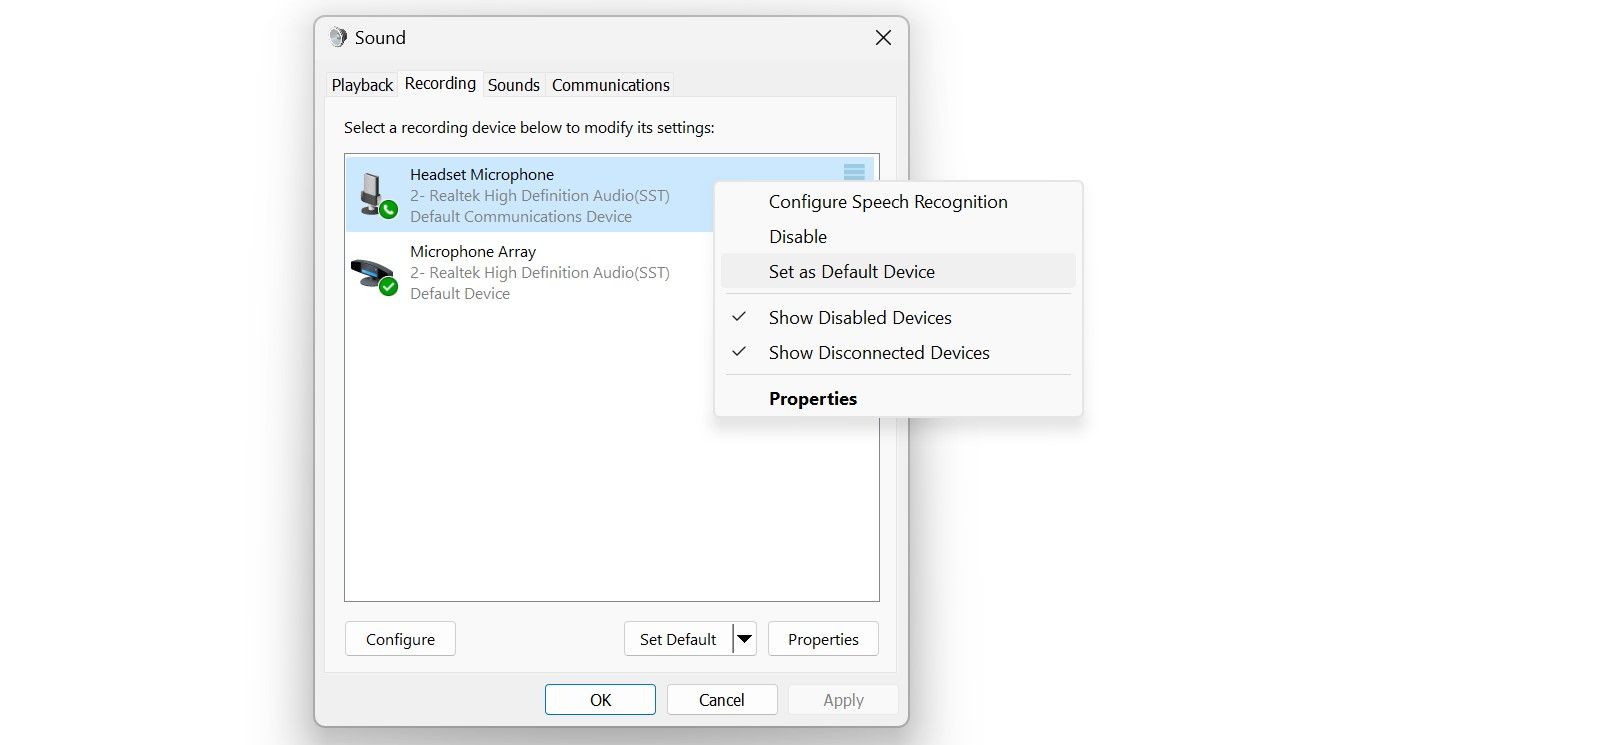 Changing the default microphone device in the sound settings window